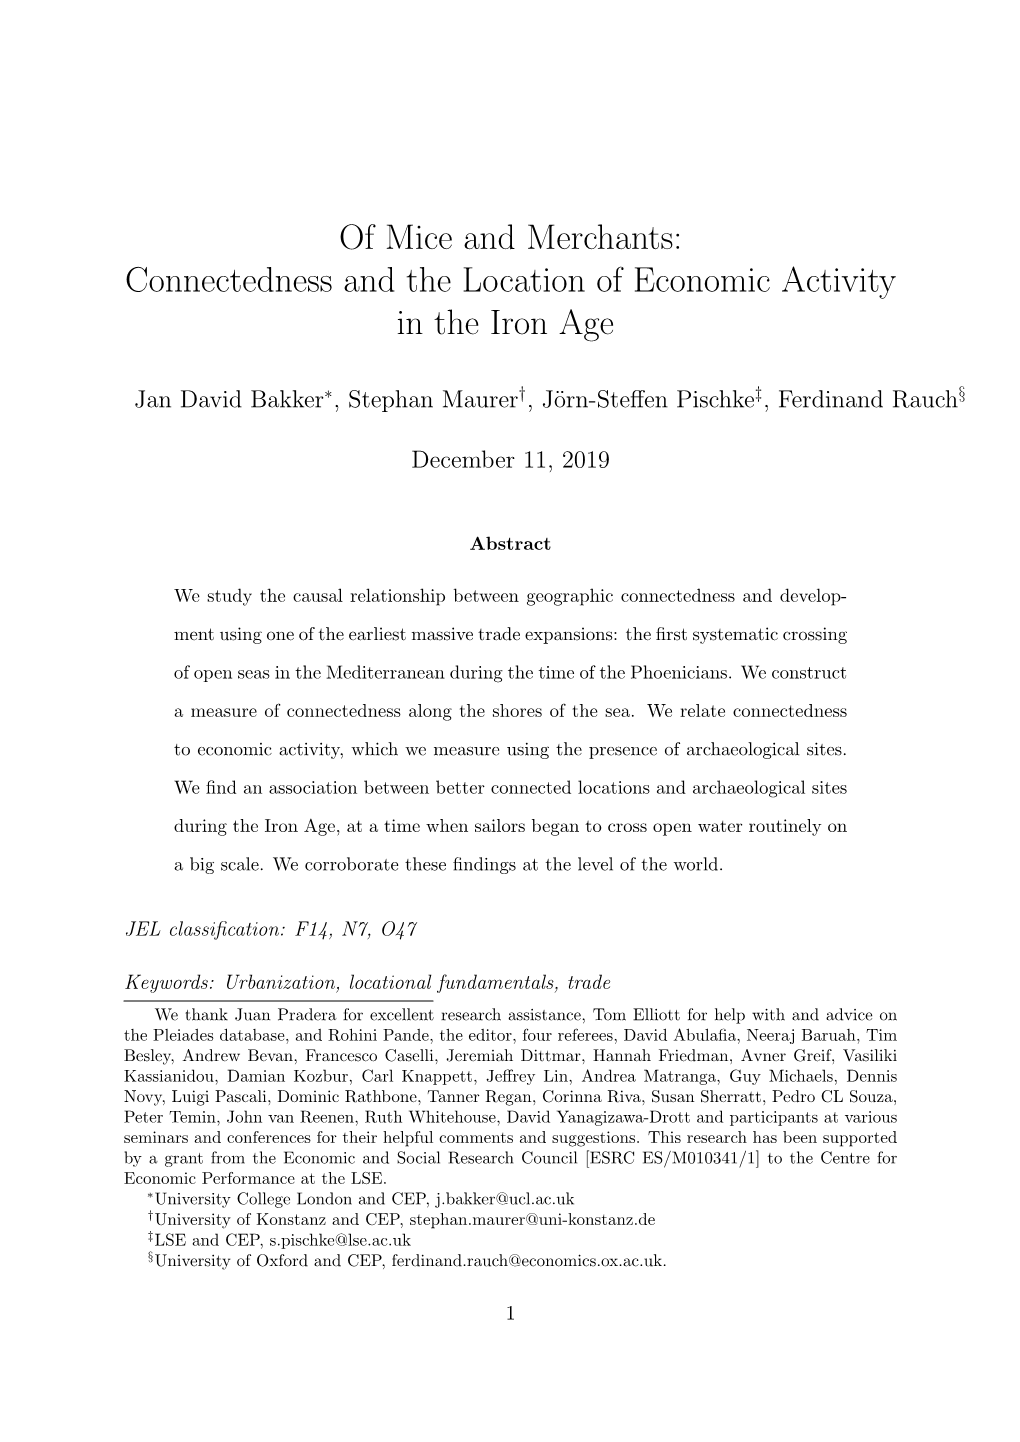 Connectedness and the Location of Economic Activity in the Iron Age